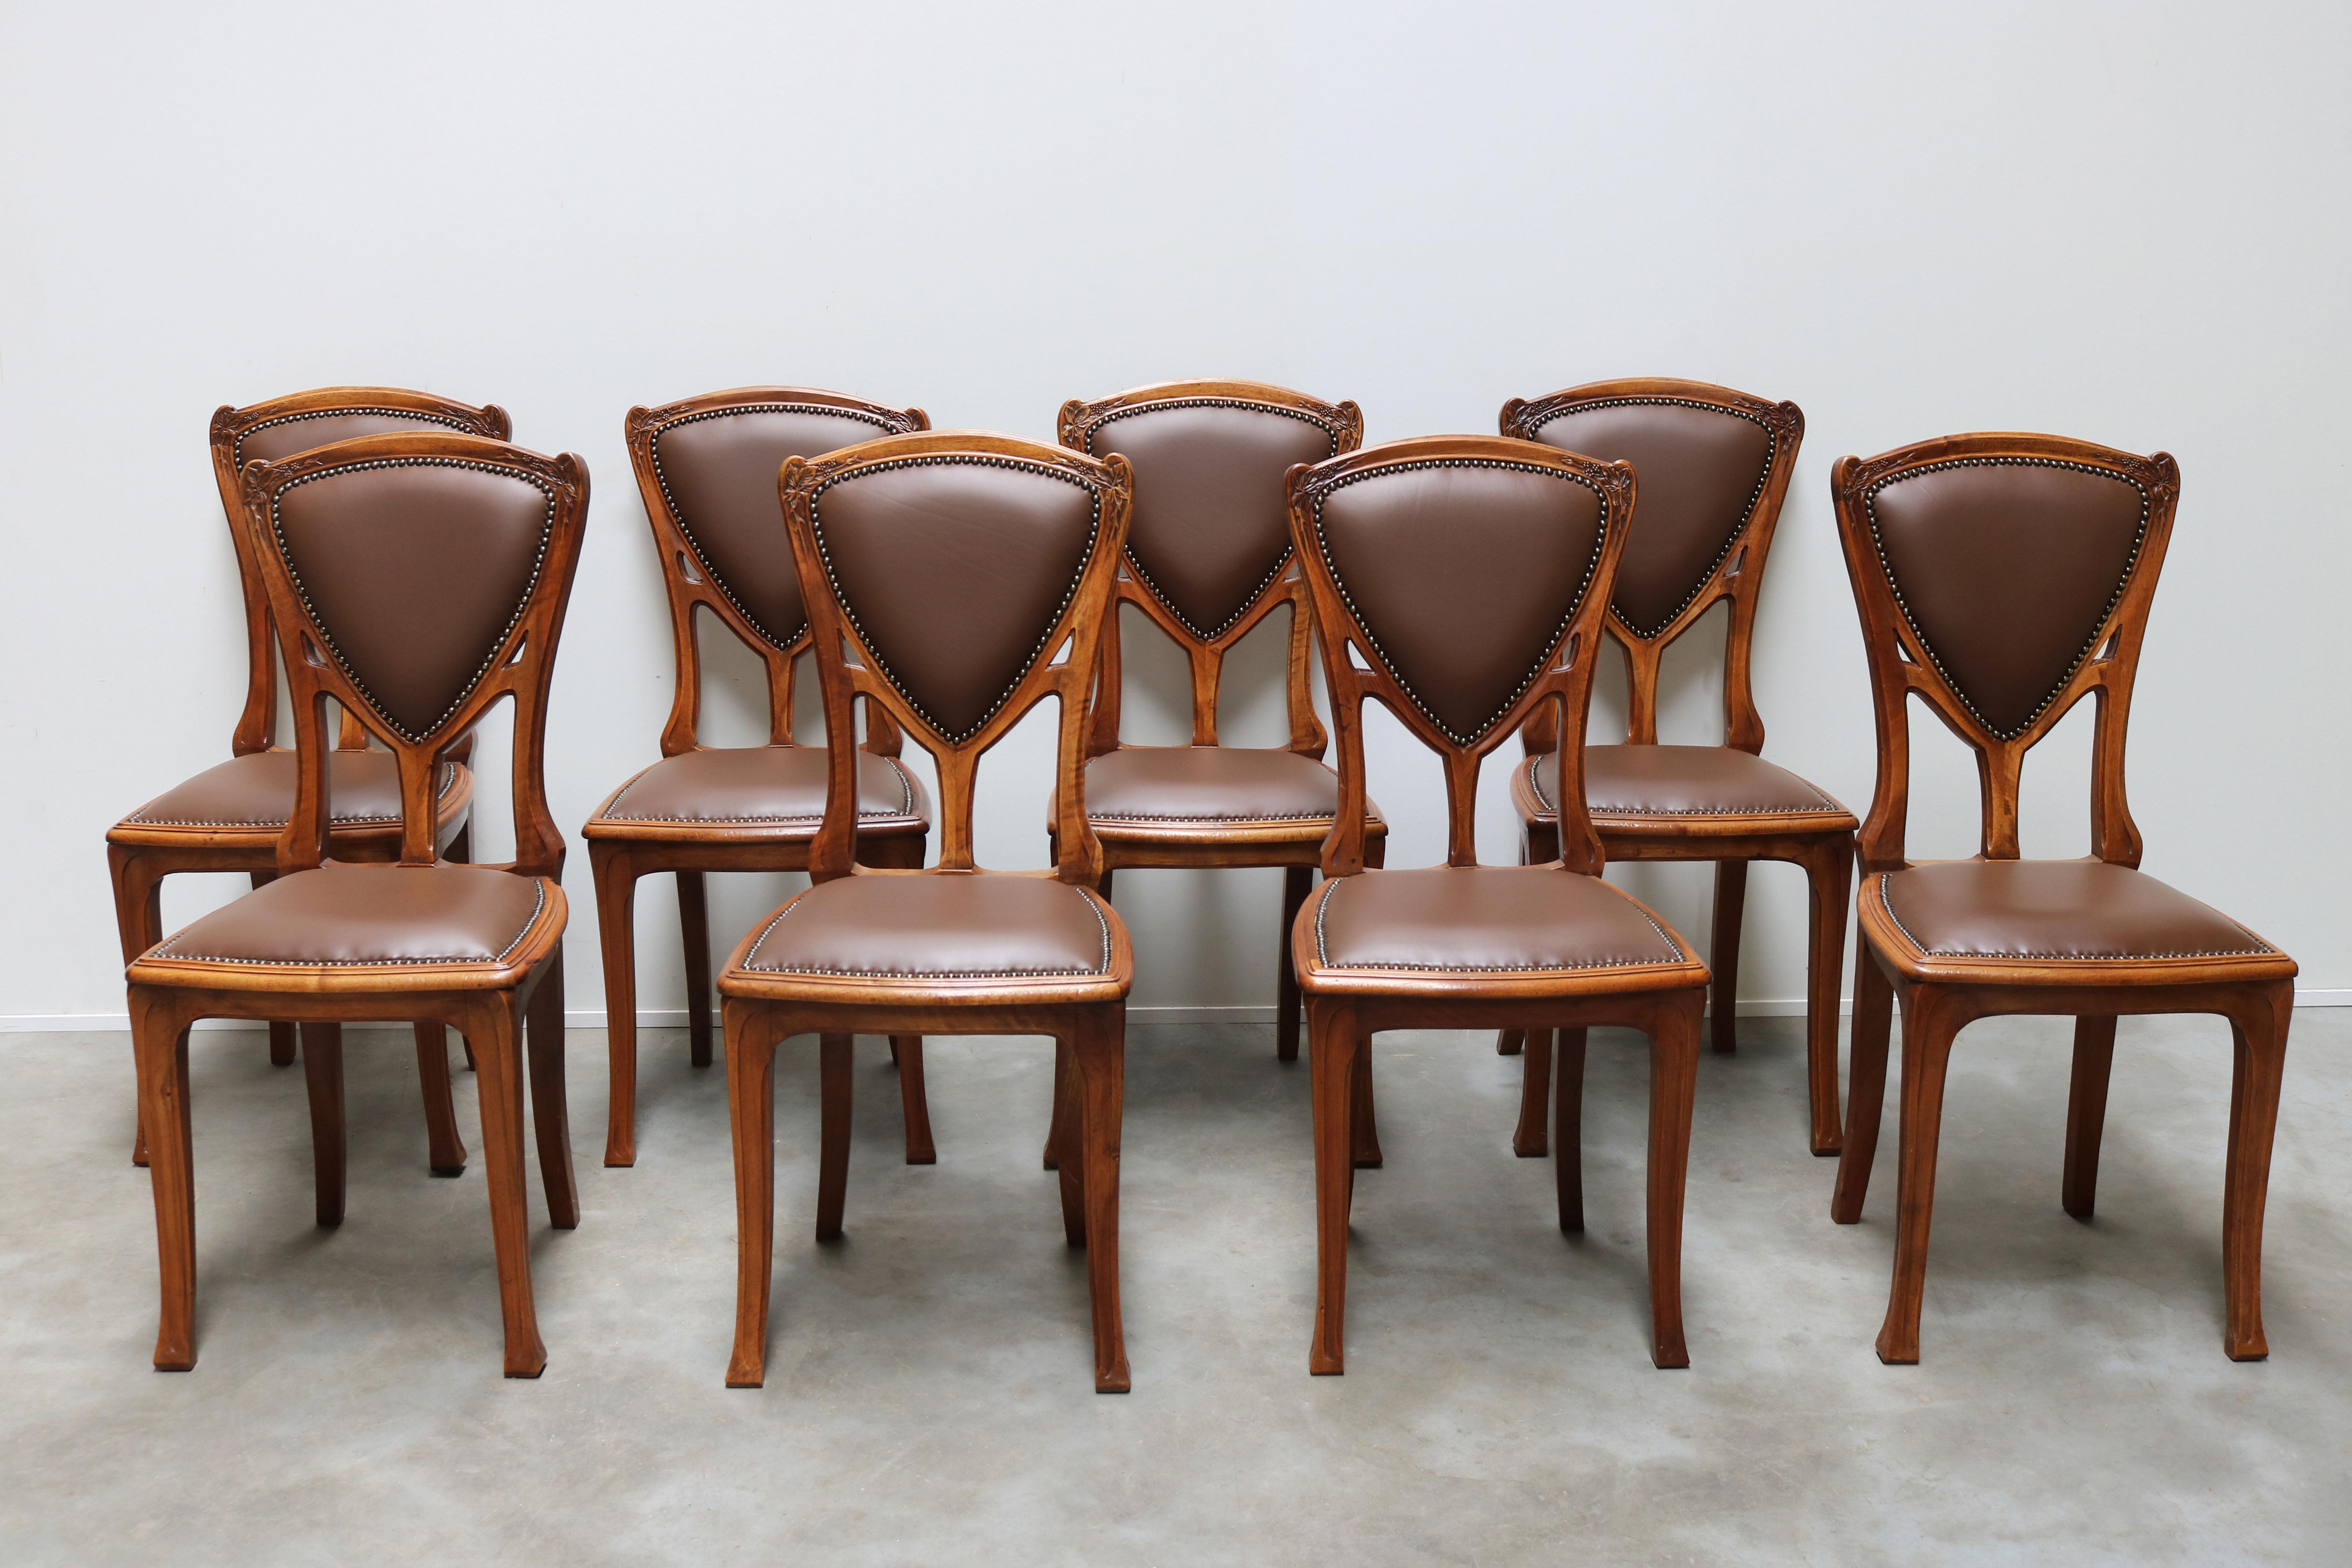 Exquisite & most rare! This French Art Nouveau dining set consisting of 8 chairs and matching table by Eugène Vallin in solid walnut. The chairs where designed for the famous art nouveau building /project ''La Maison Bergeret'' 1903-1904. 
The